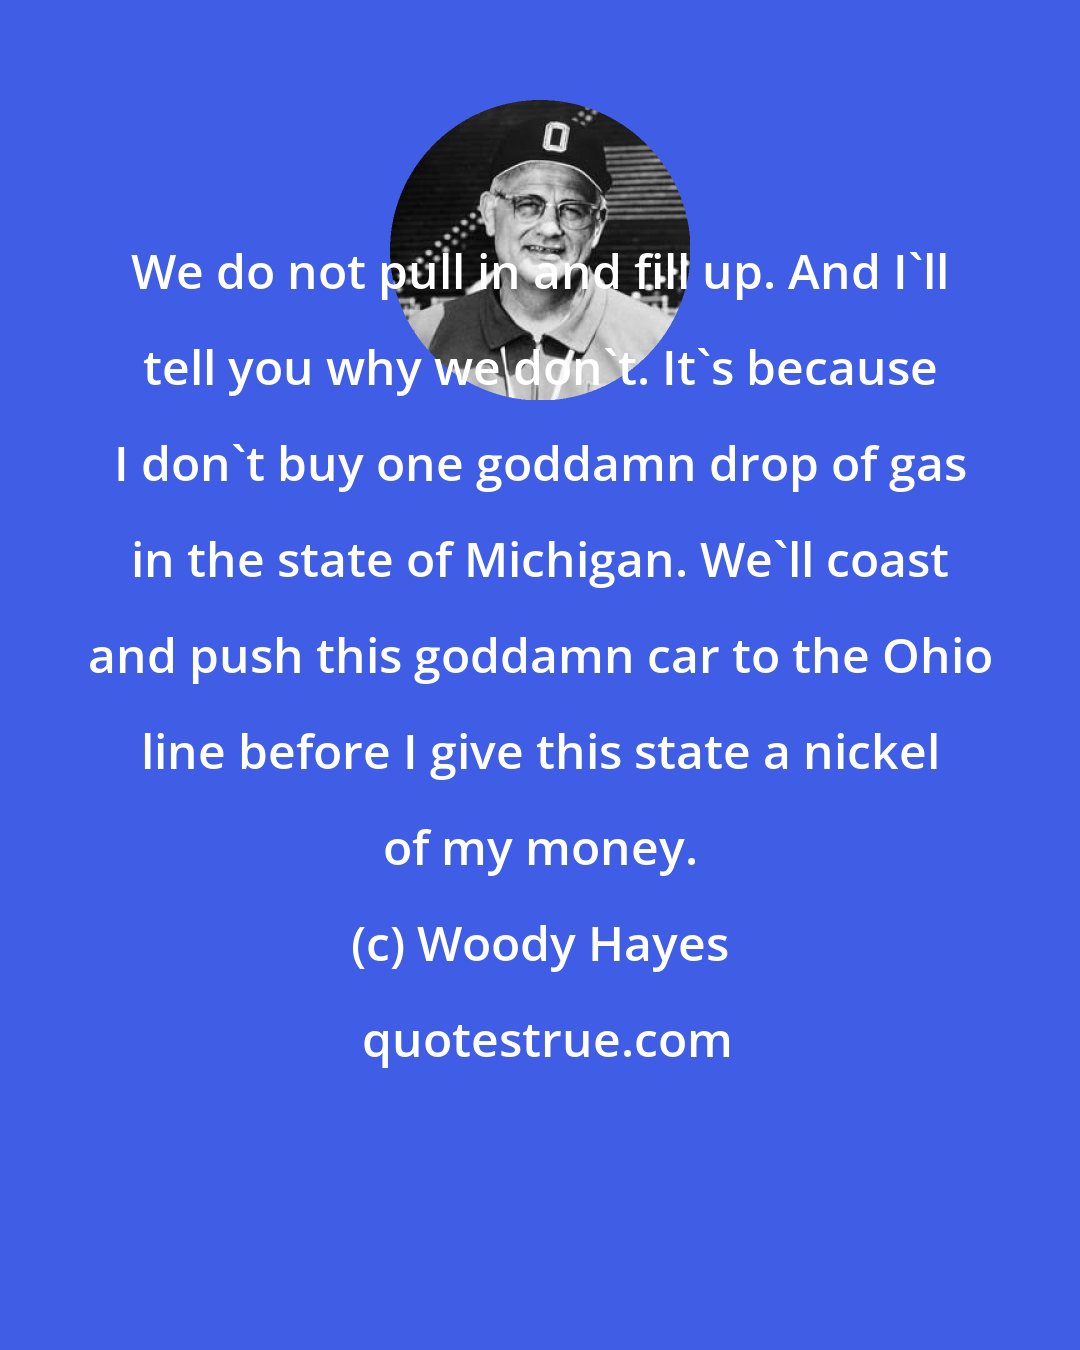 Woody Hayes: We do not pull in and fill up. And I'll tell you why we don't. It's because I don't buy one goddamn drop of gas in the state of Michigan. We'll coast and push this goddamn car to the Ohio line before I give this state a nickel of my money.